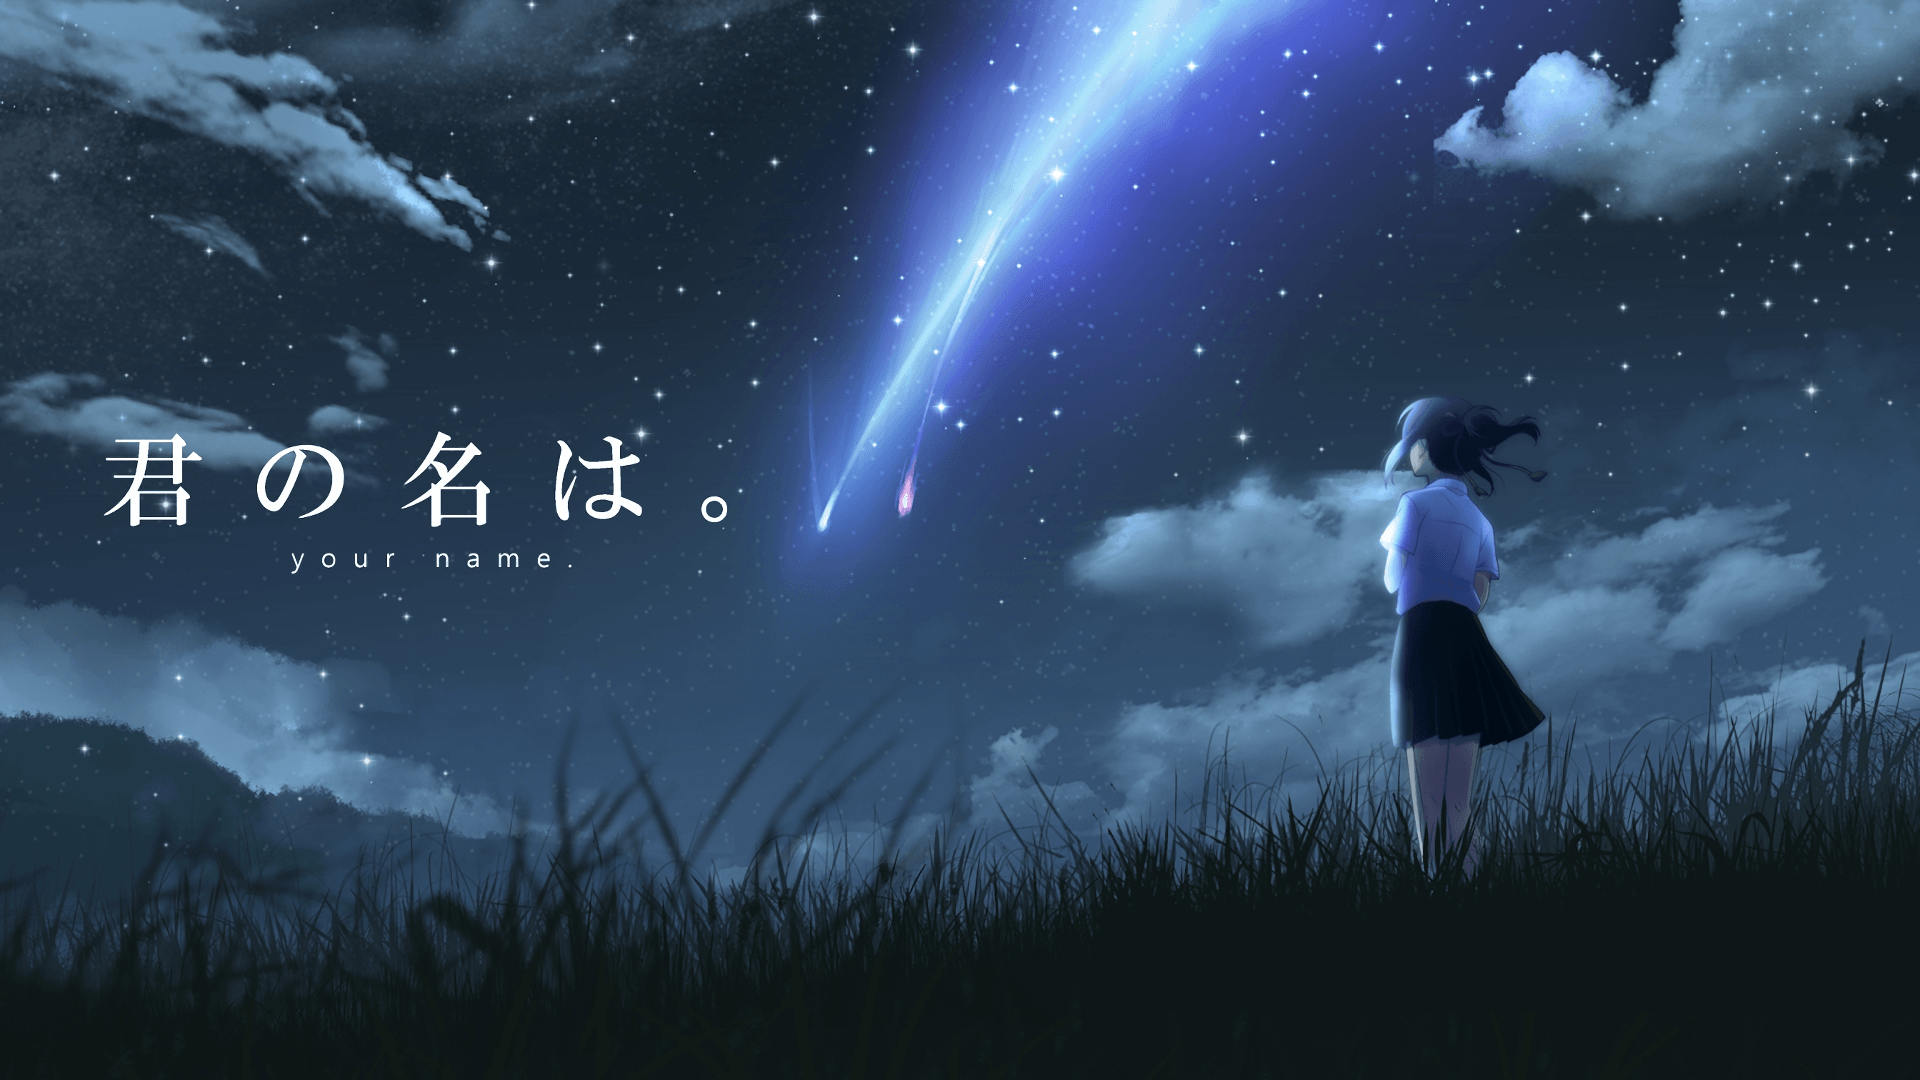 Your Name Wallpaper iPhone, image collections of wallpaper